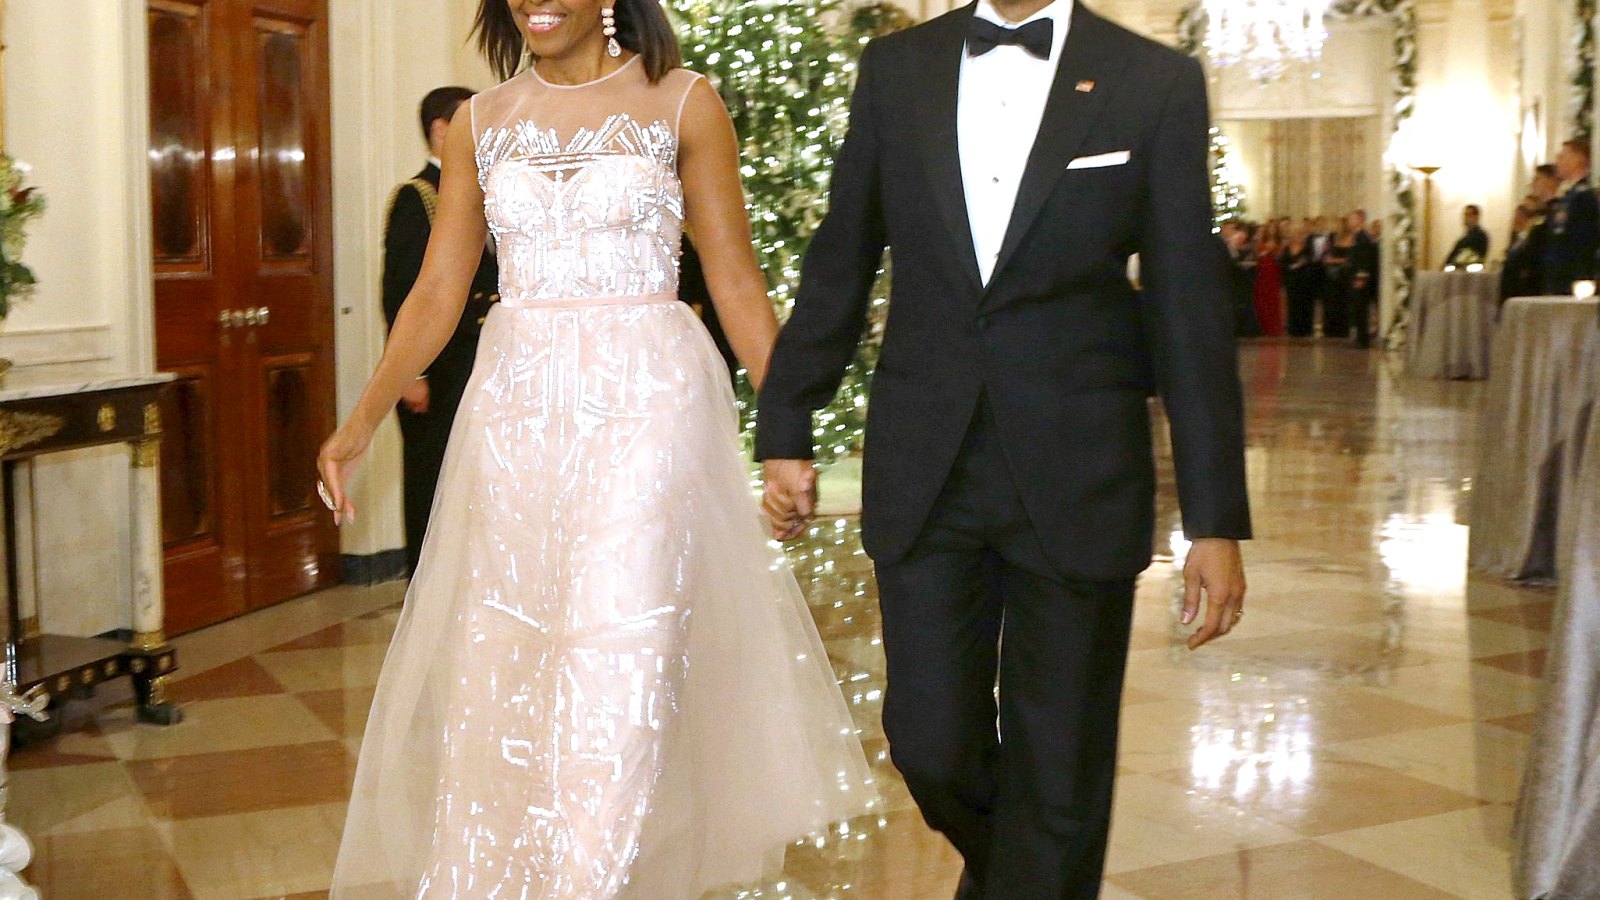 Michelle and Barack Obama at the White House in Washington Dec. 7.